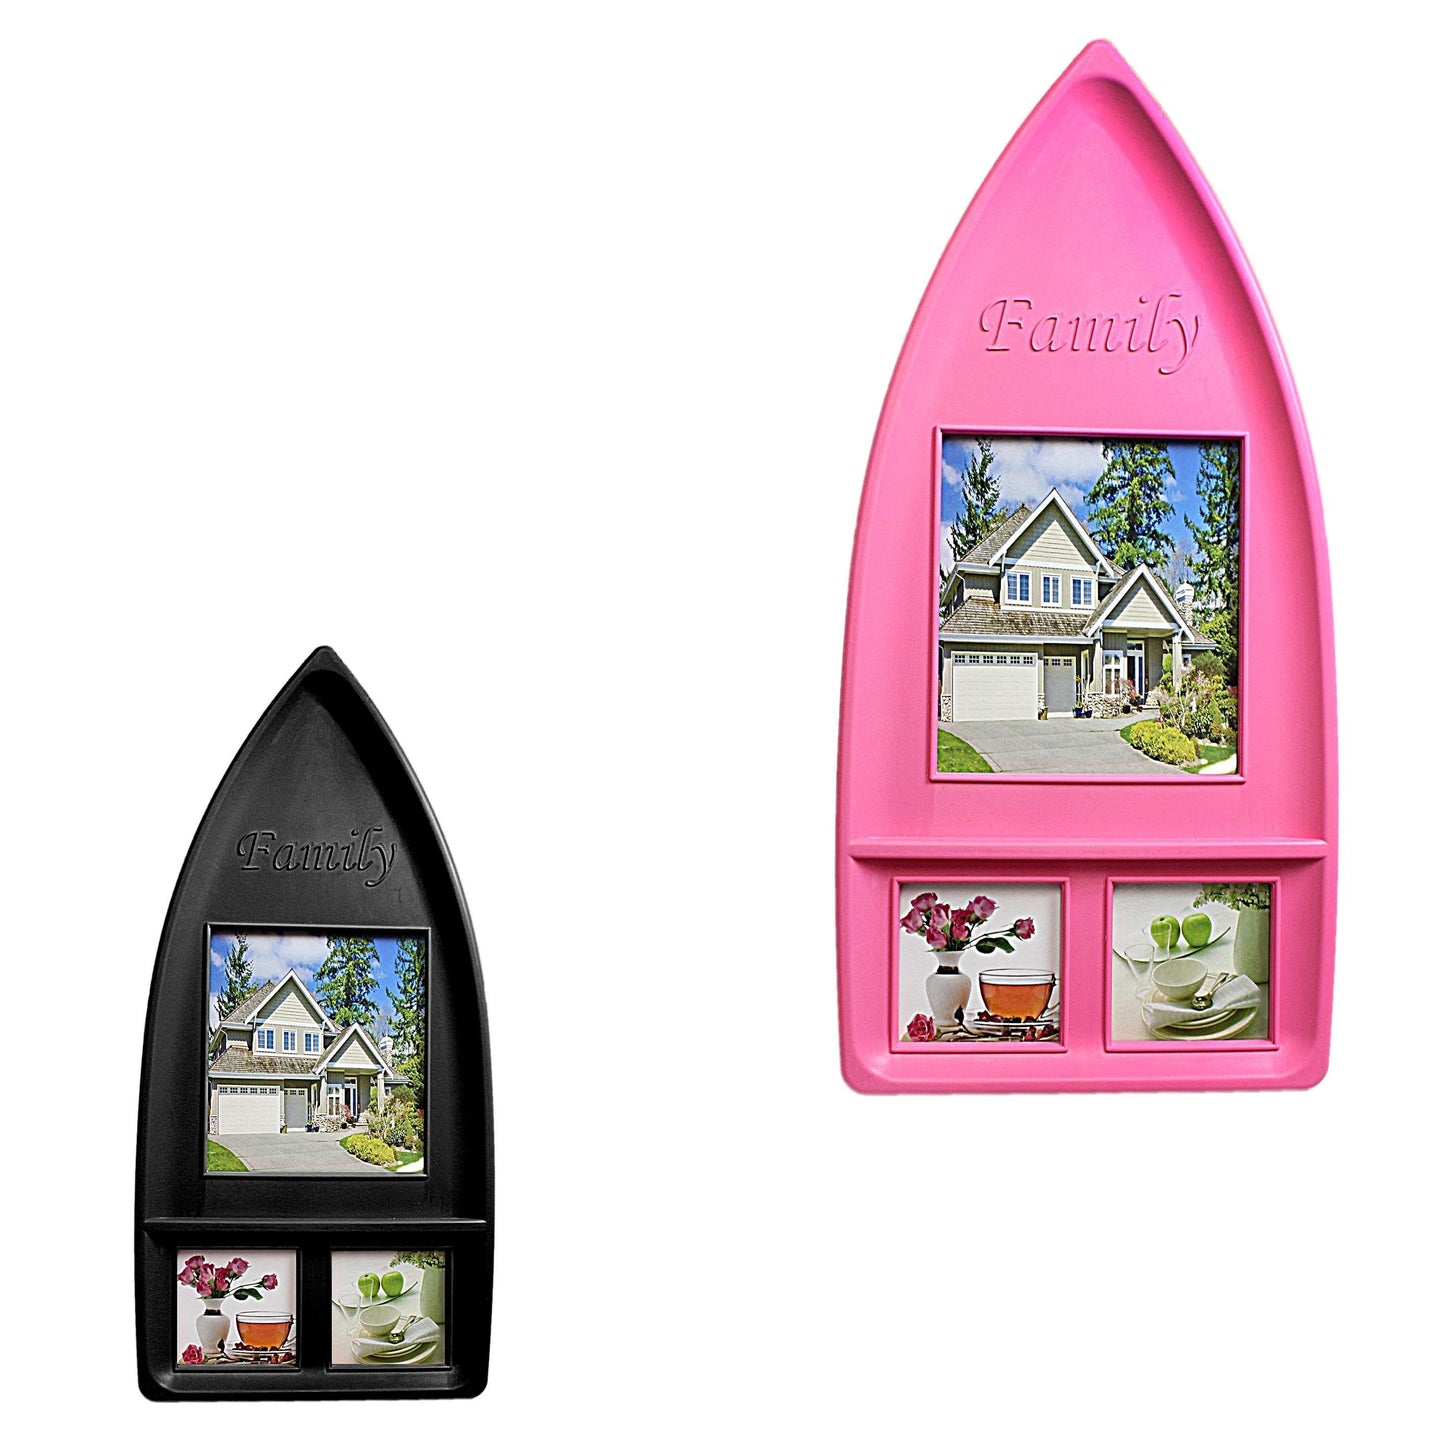 Family Picture Photo Frame Sledge Style White/ Black/ Pink 3 In 1 2209 (Parcel Rate)